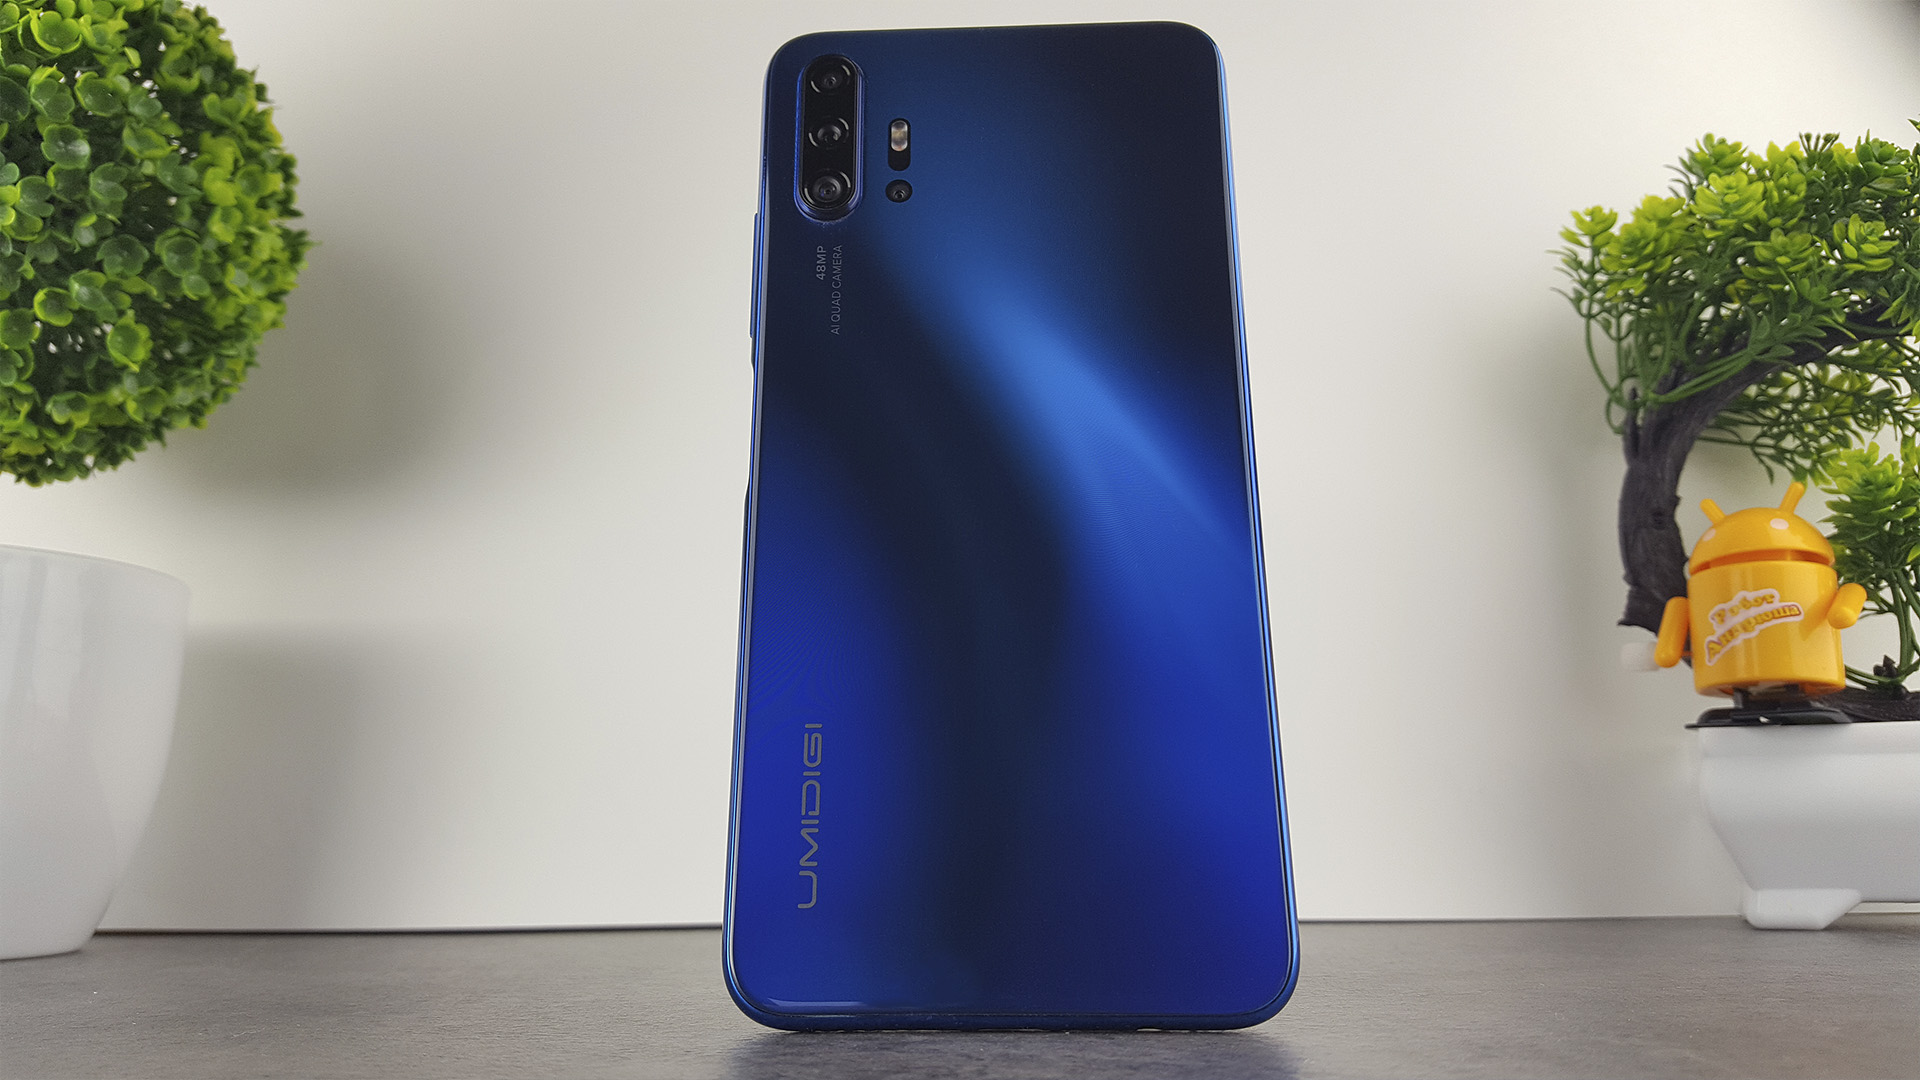 Overview UMIDIGI F2 - back panel appearance gradient